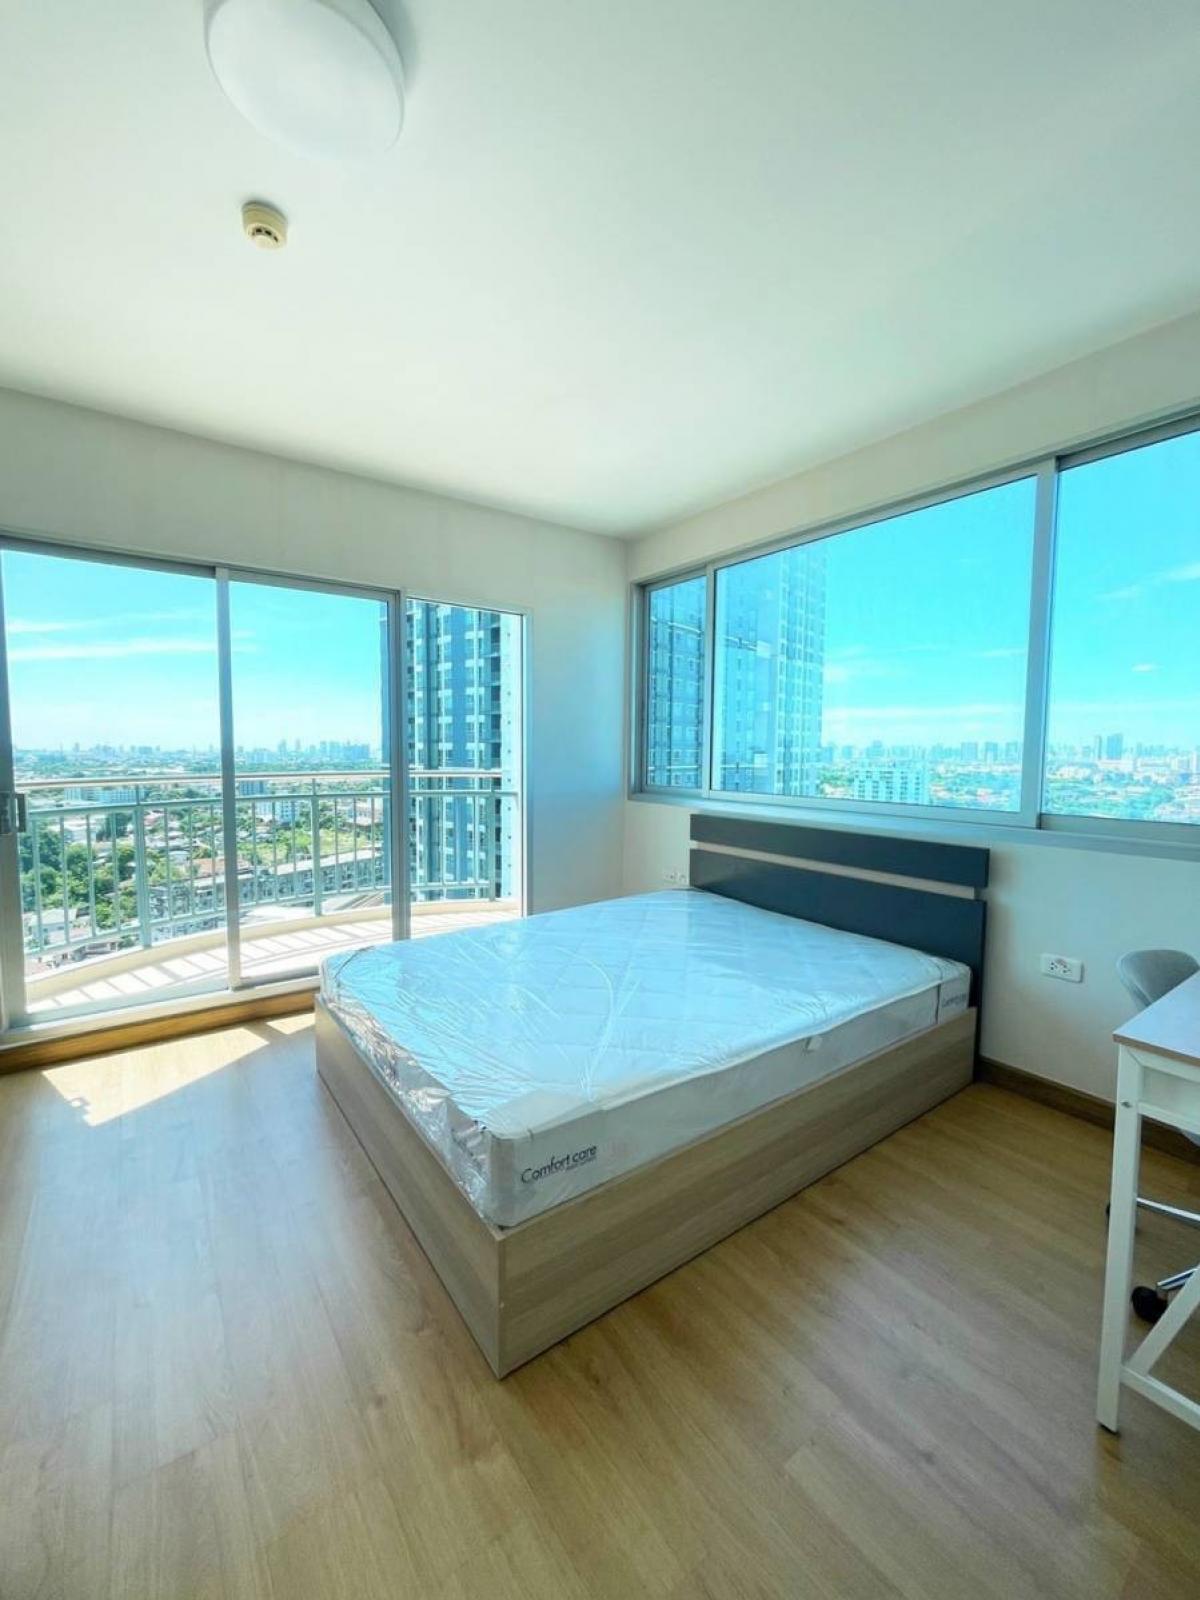 For SaleCondoRama5, Ratchapruek, Bangkruai : 🔥Supalai Vista Condo for sale, Tiwanon Intersection, room size 68 sq m., 2 bedrooms, 2 bathrooms, new room, never rented out🔥